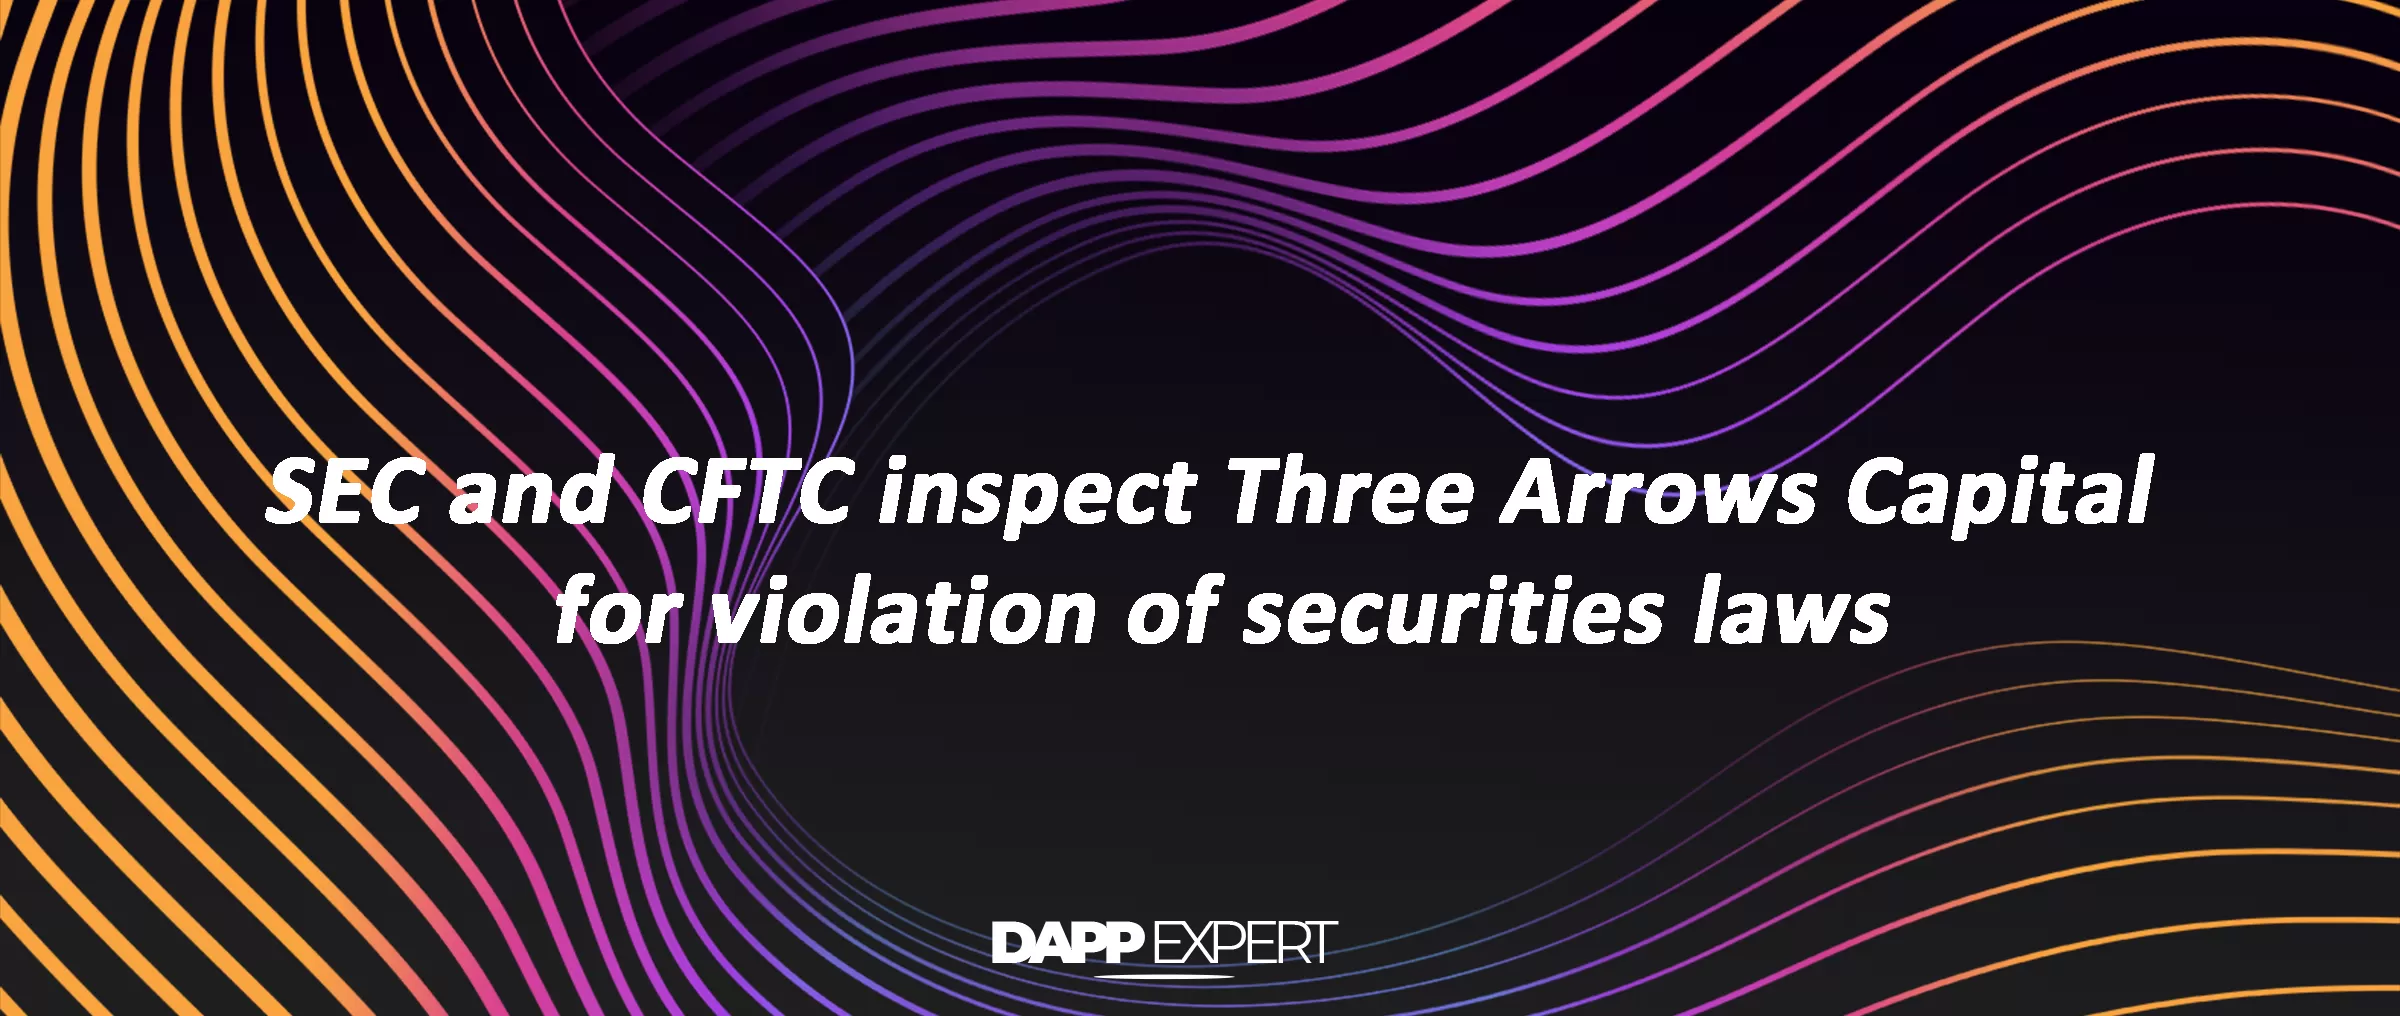 SEC and CFTC inspect Three Arrows Capital for violation of securities laws